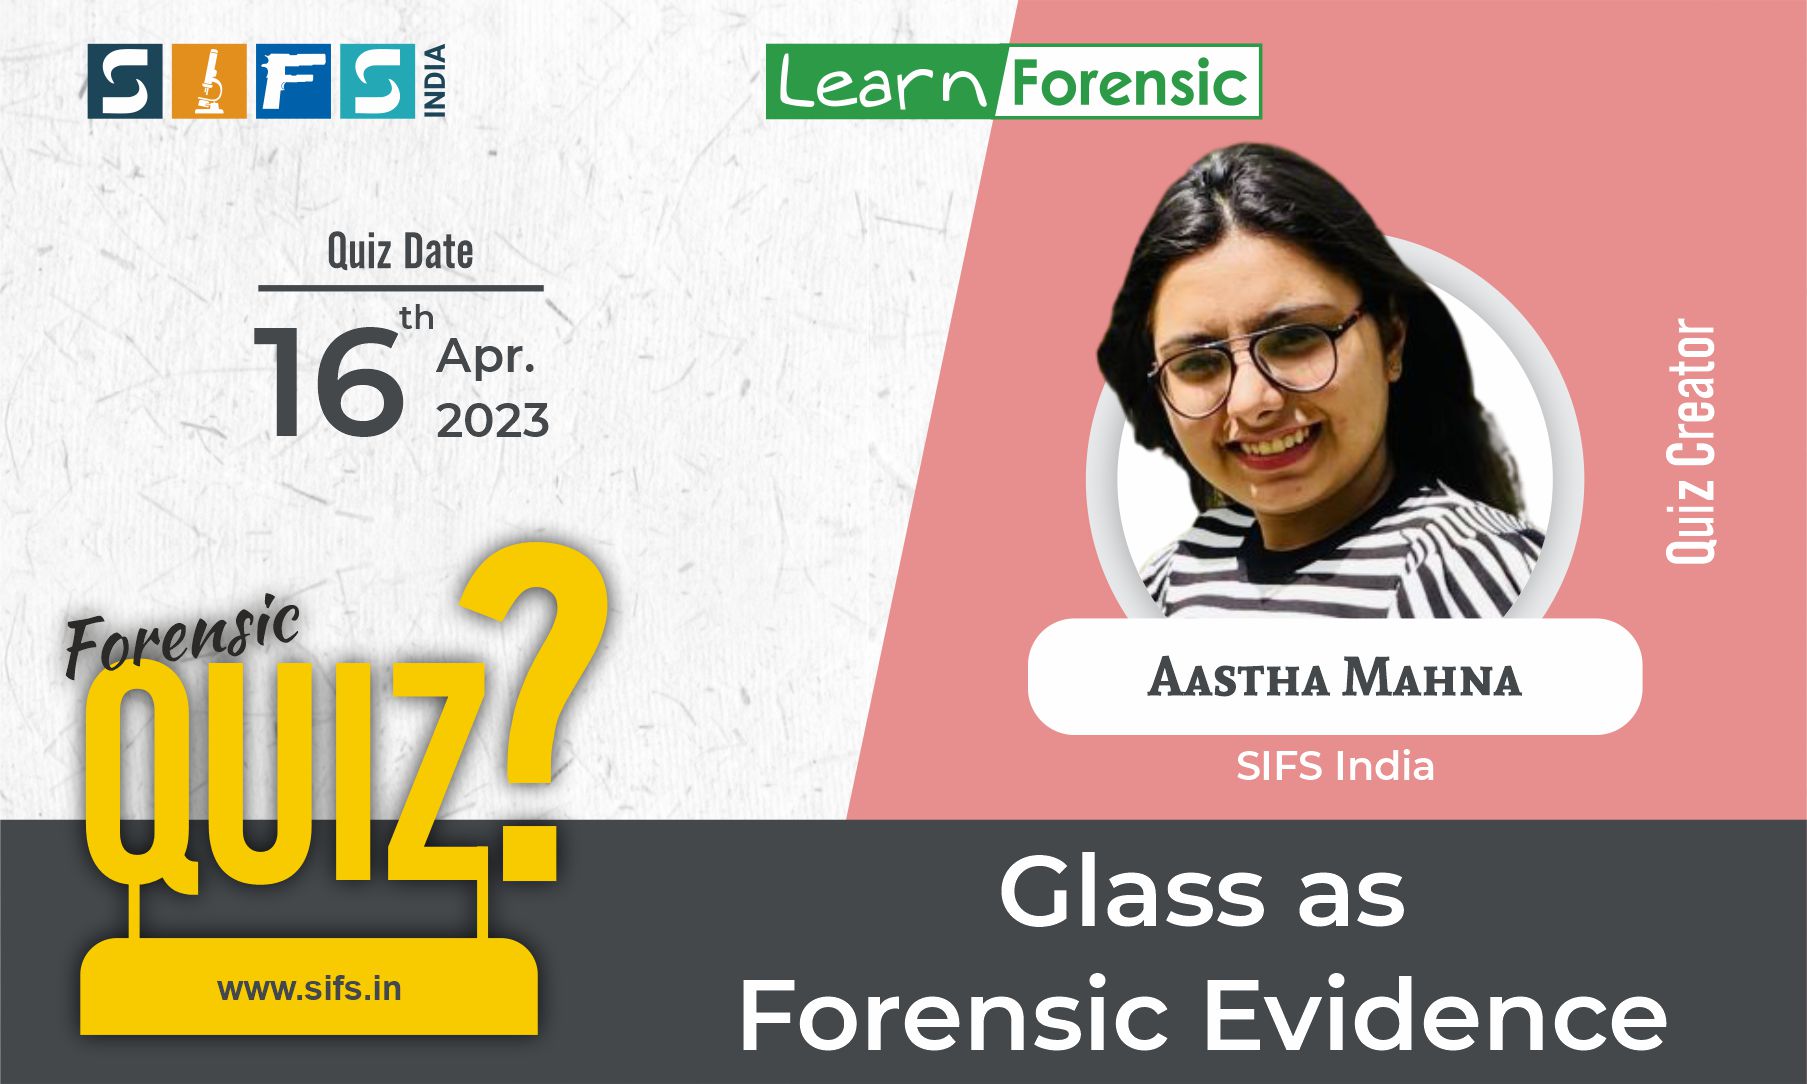 Glass as Forensic Evidence